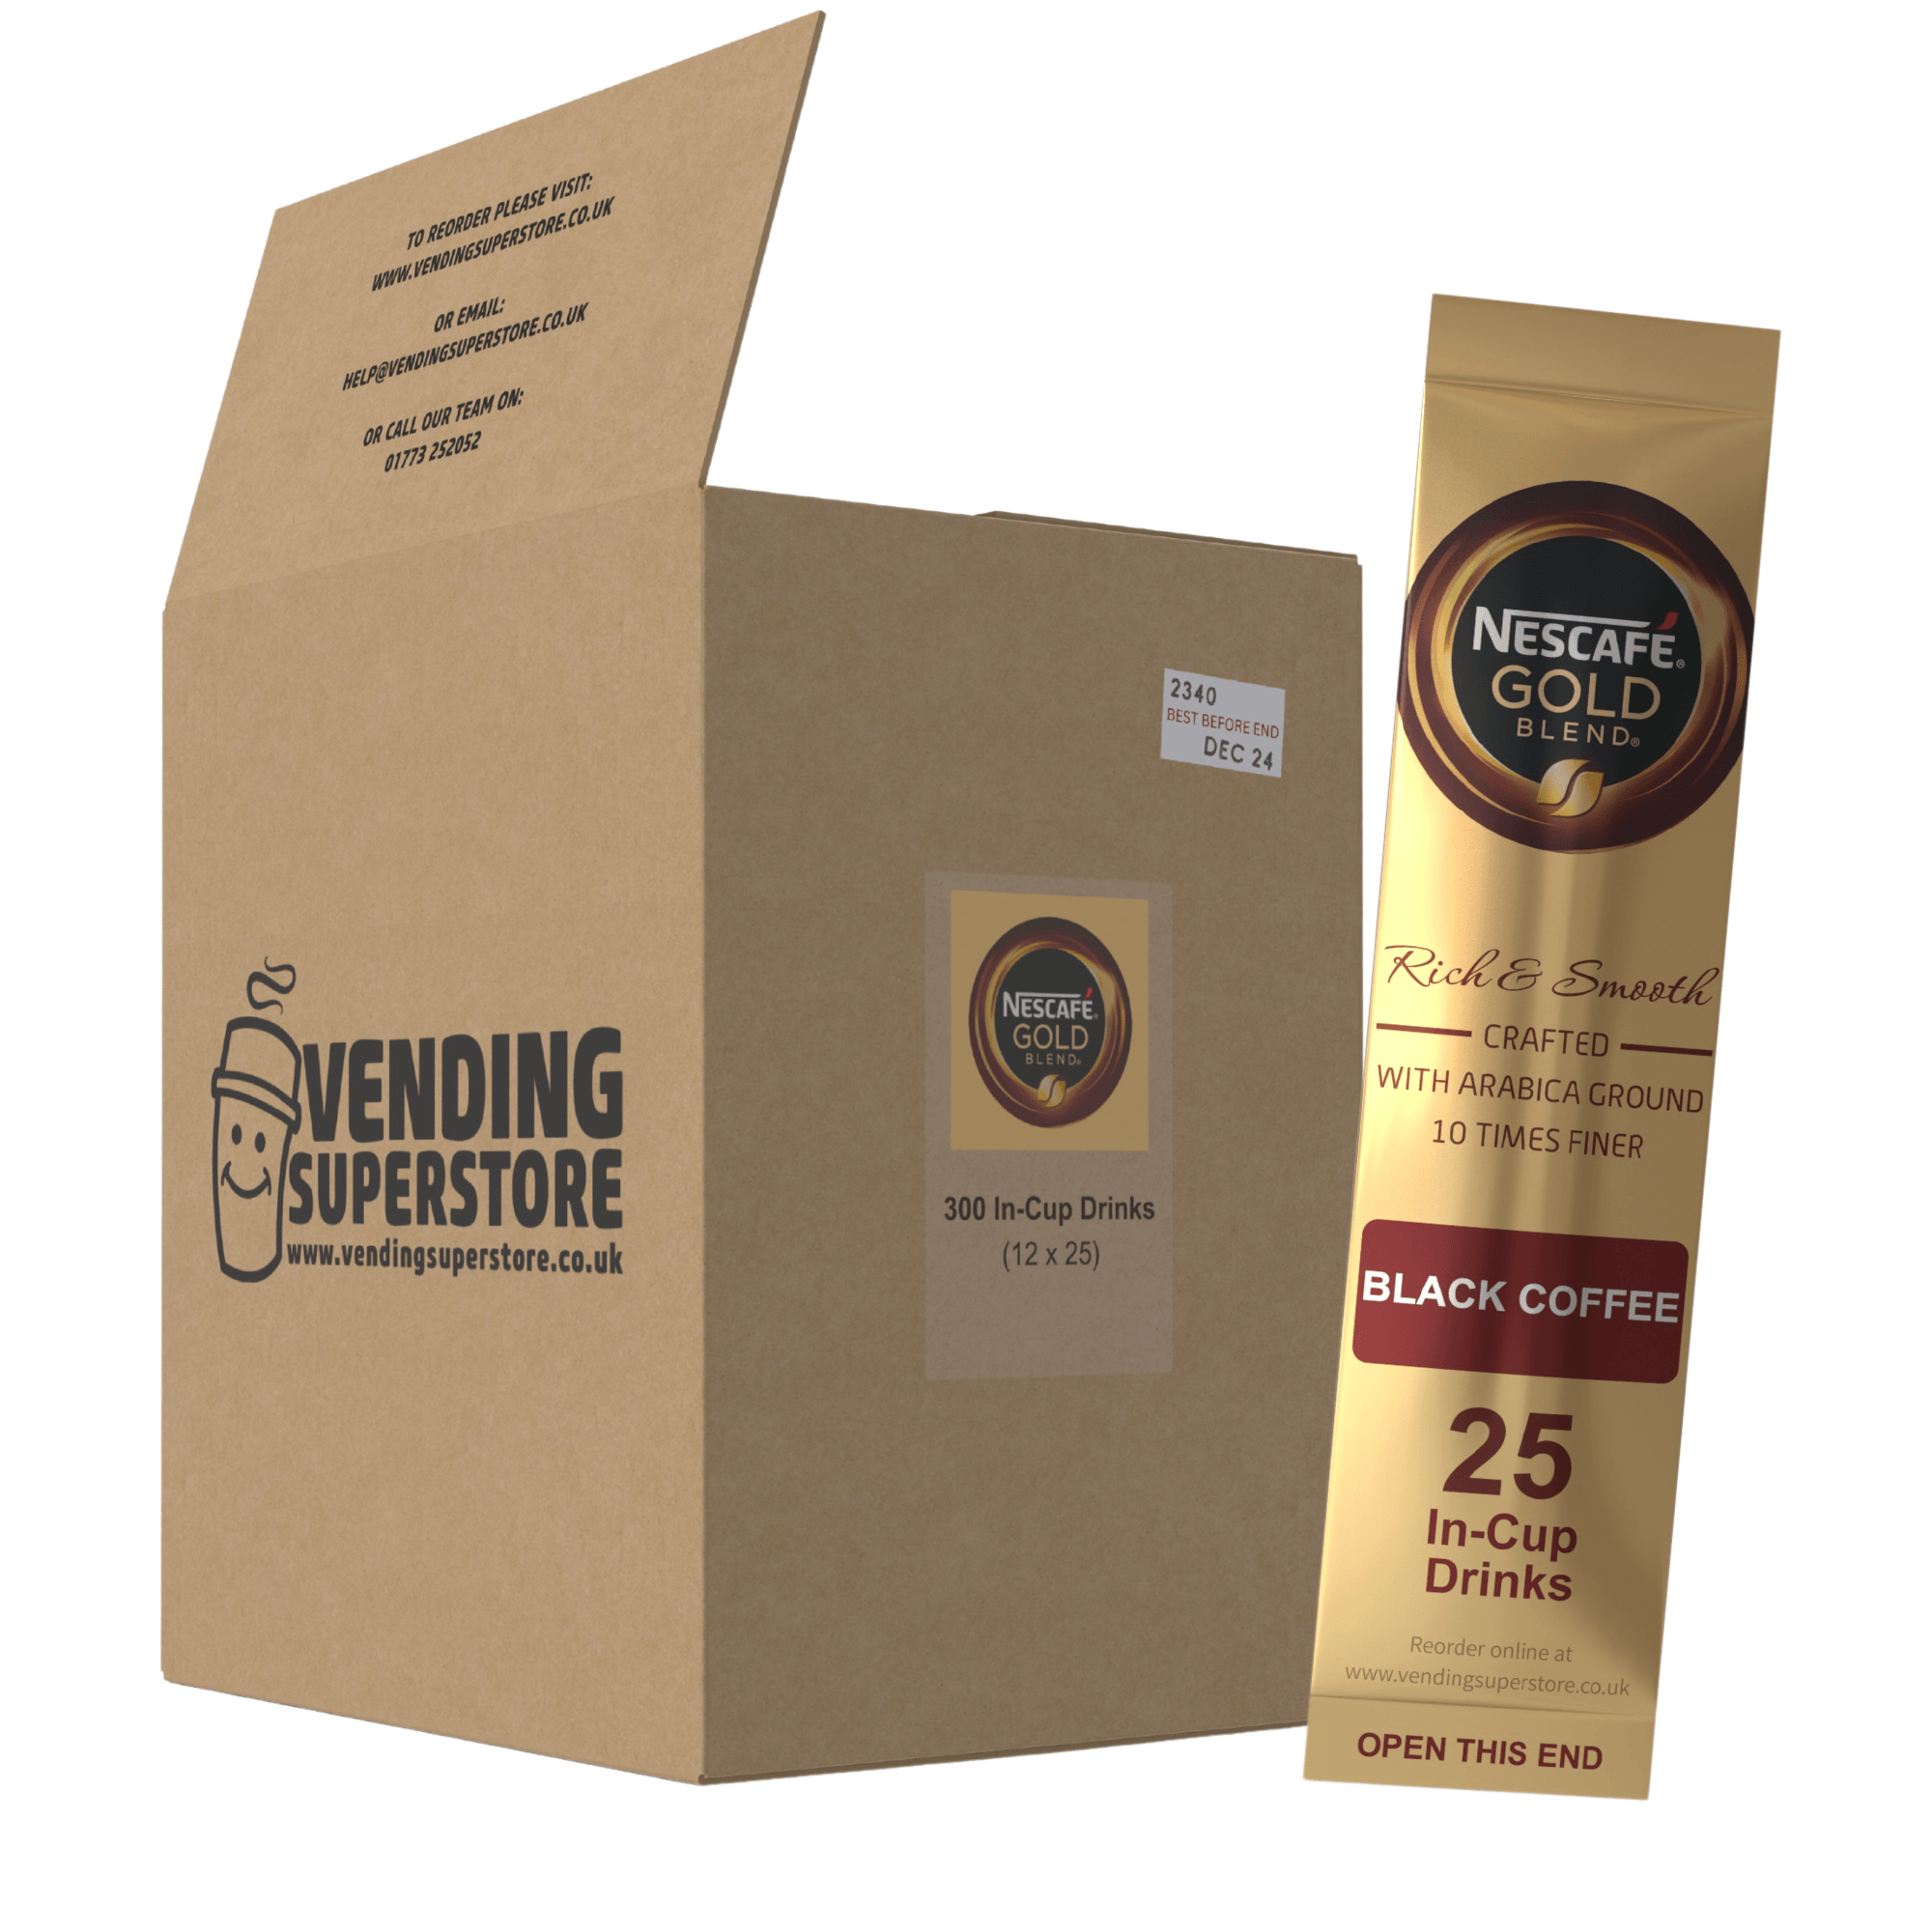 Incup Vending Drinks - Nescafe Gold Blend Black Coffee - Case Of 300 Cups - Vending Superstore